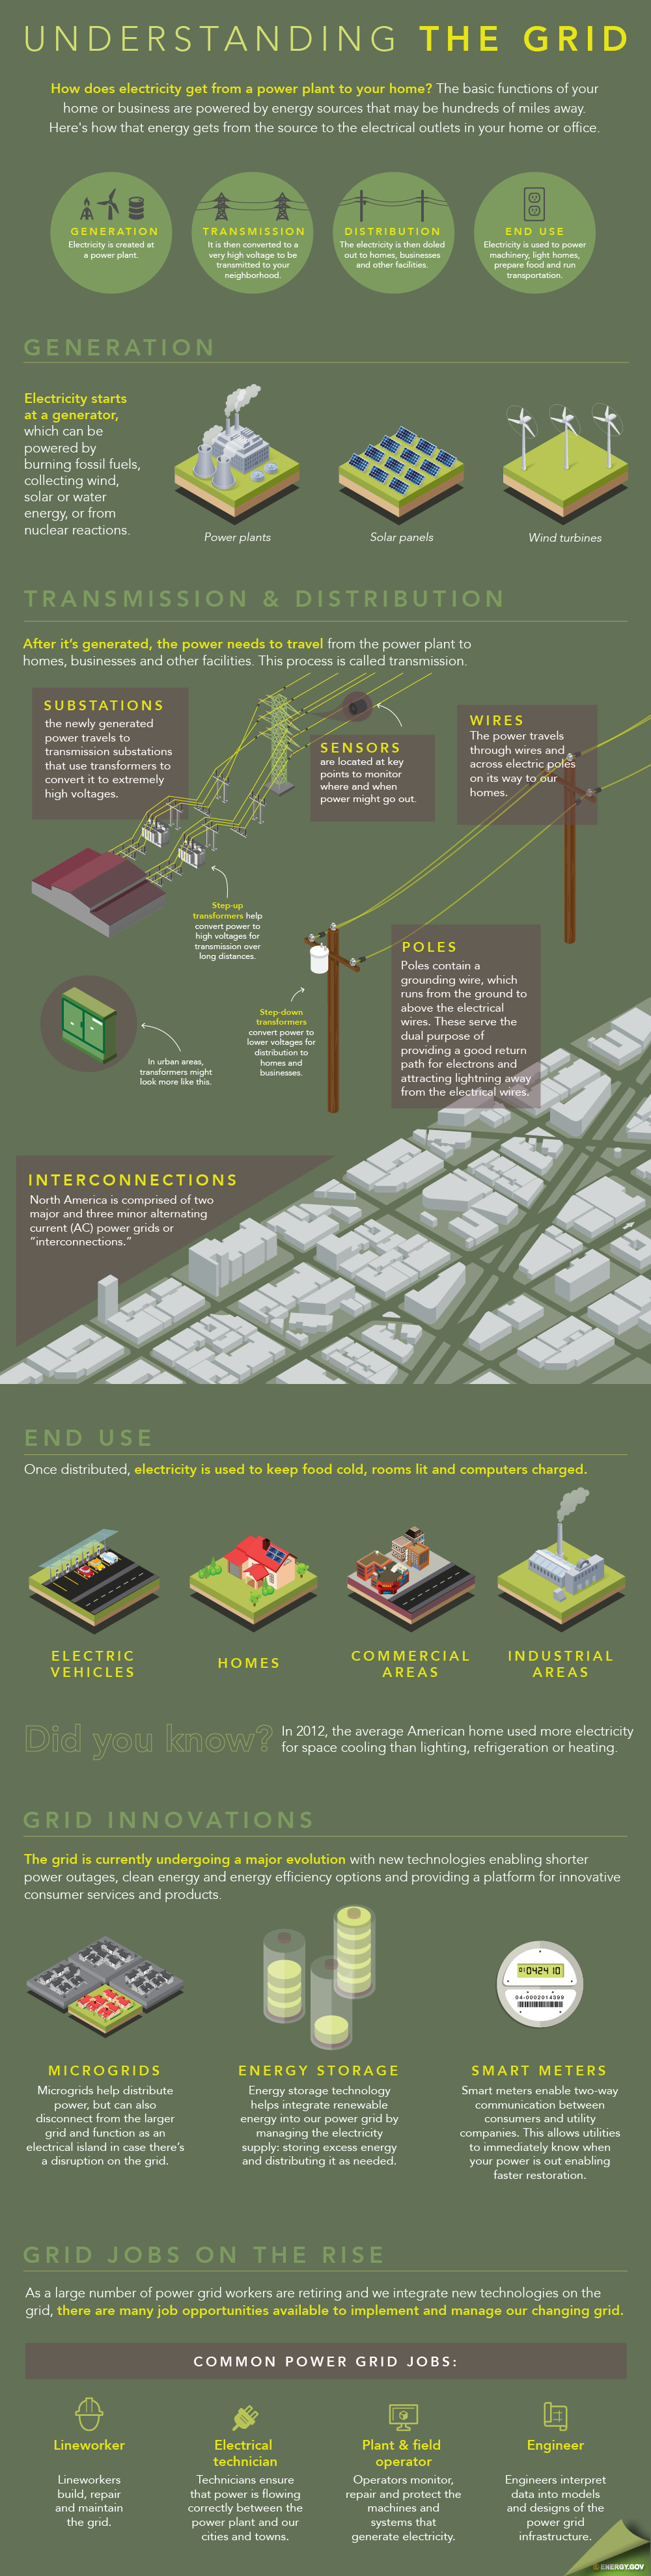 Infographic: Understanding the Electric Grid